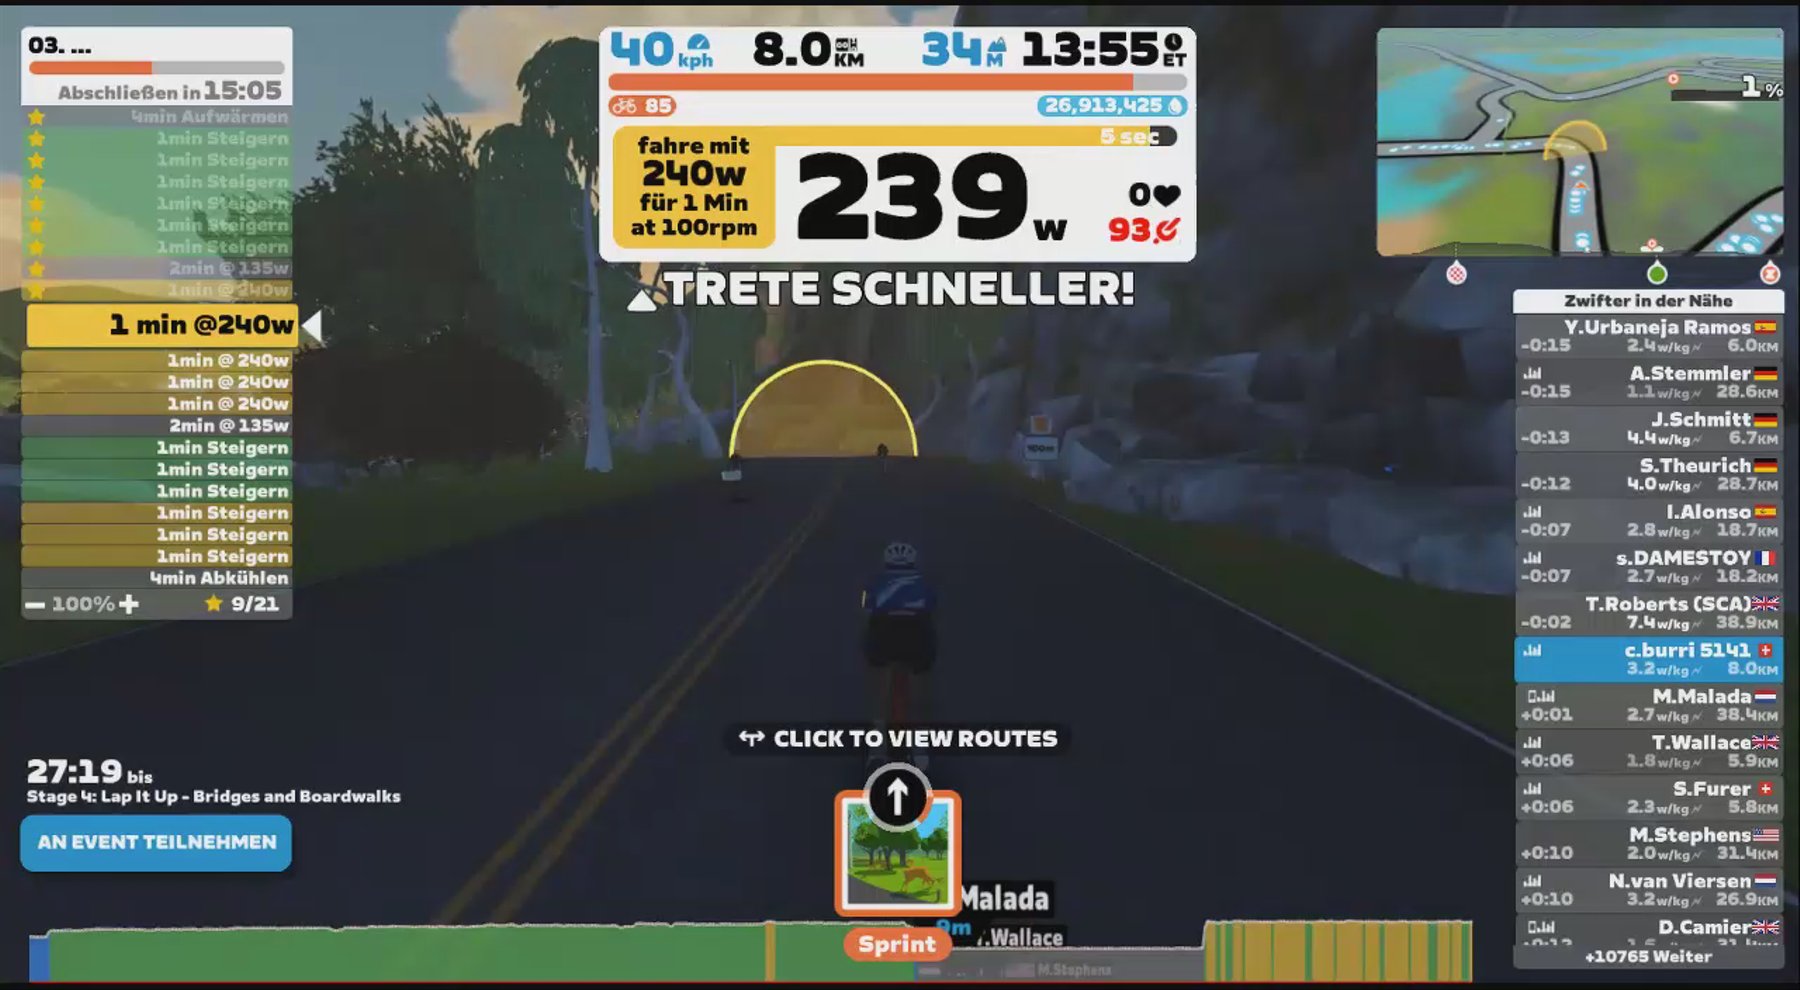 Zwift - 03. Cadence and Cruise [Lite] in Watopia